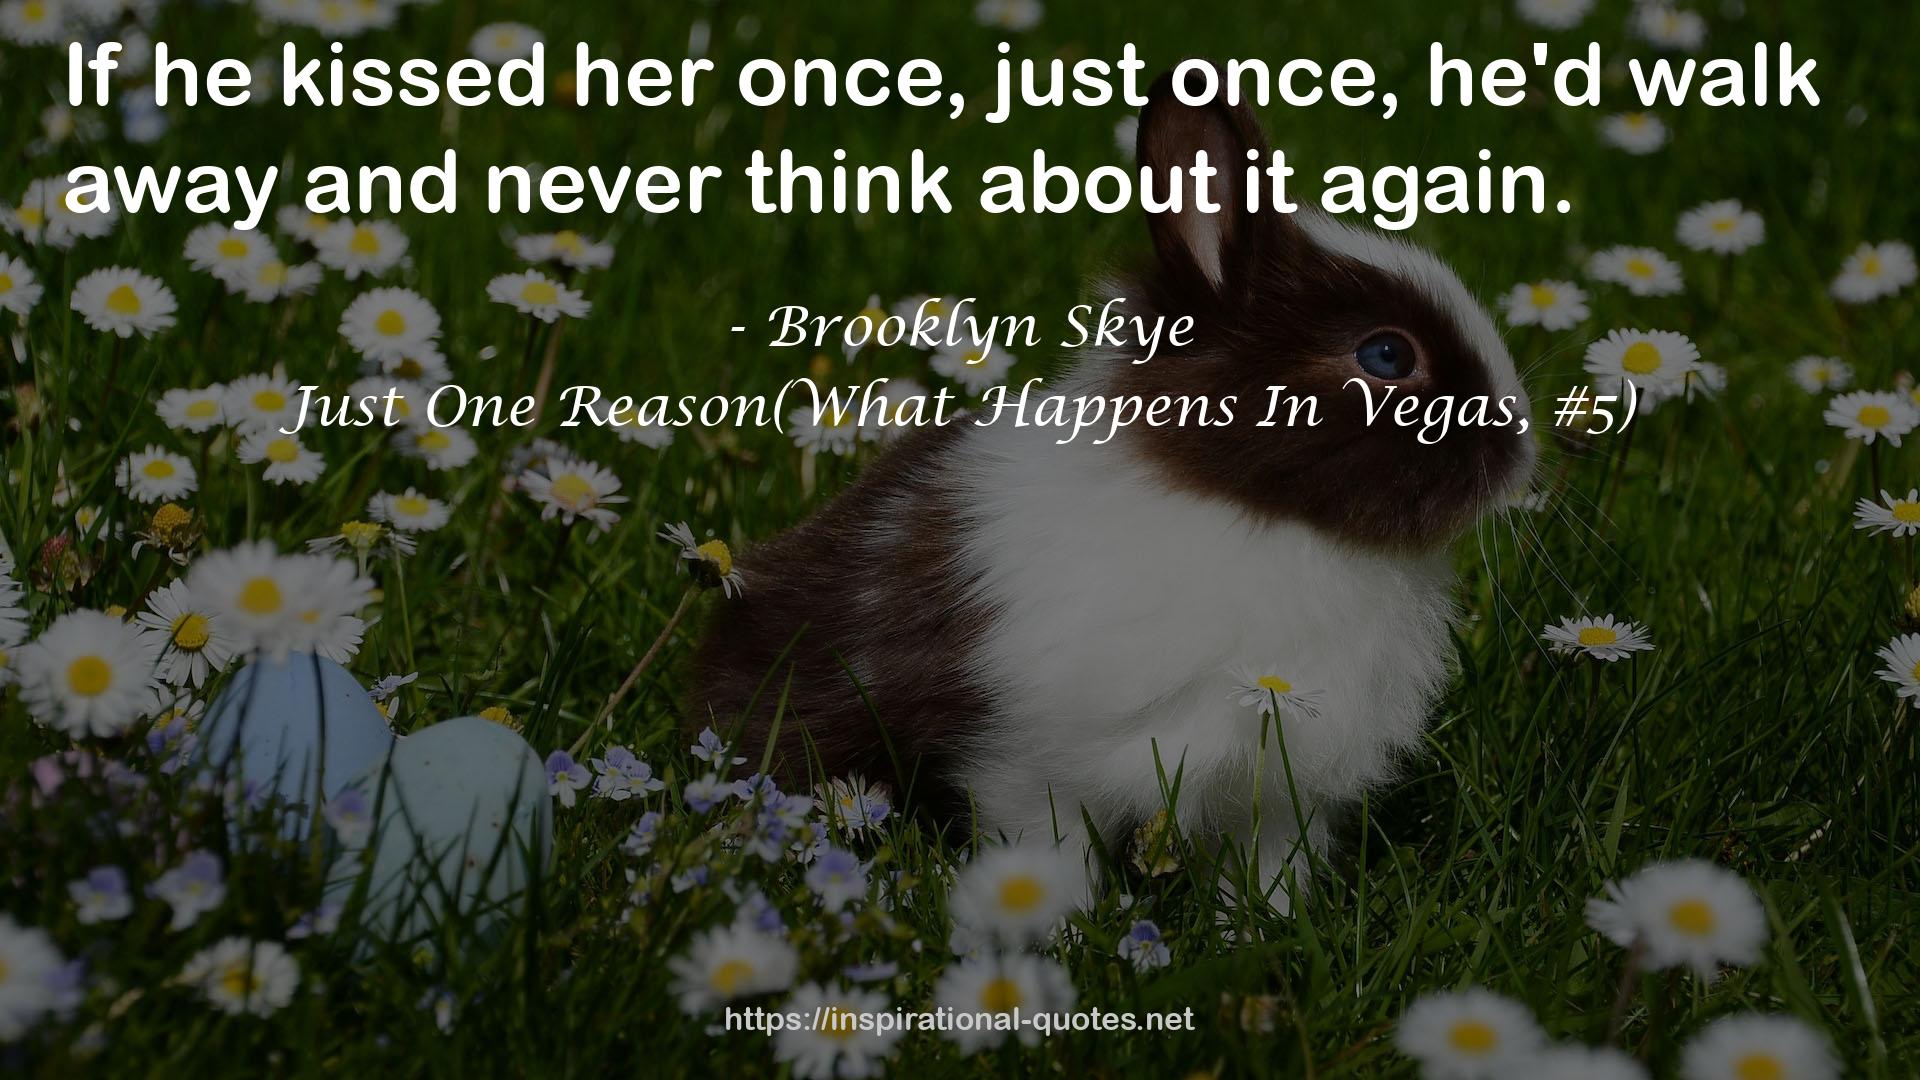 Just One Reason(What Happens In Vegas, #5) QUOTES